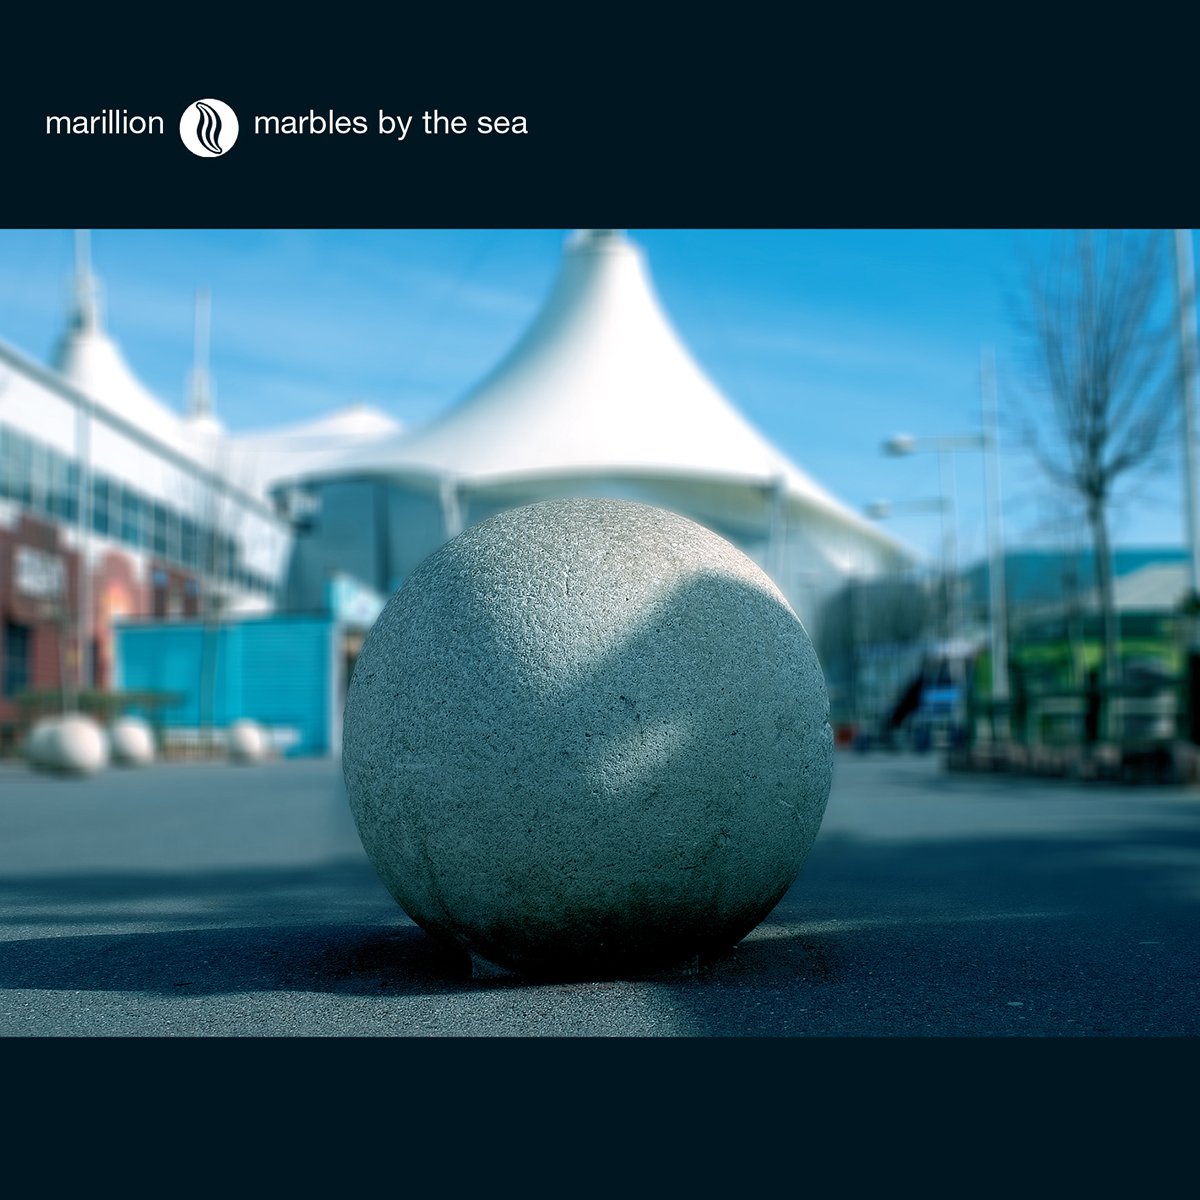 Marbles by the Sea Live Album Download 256kbps